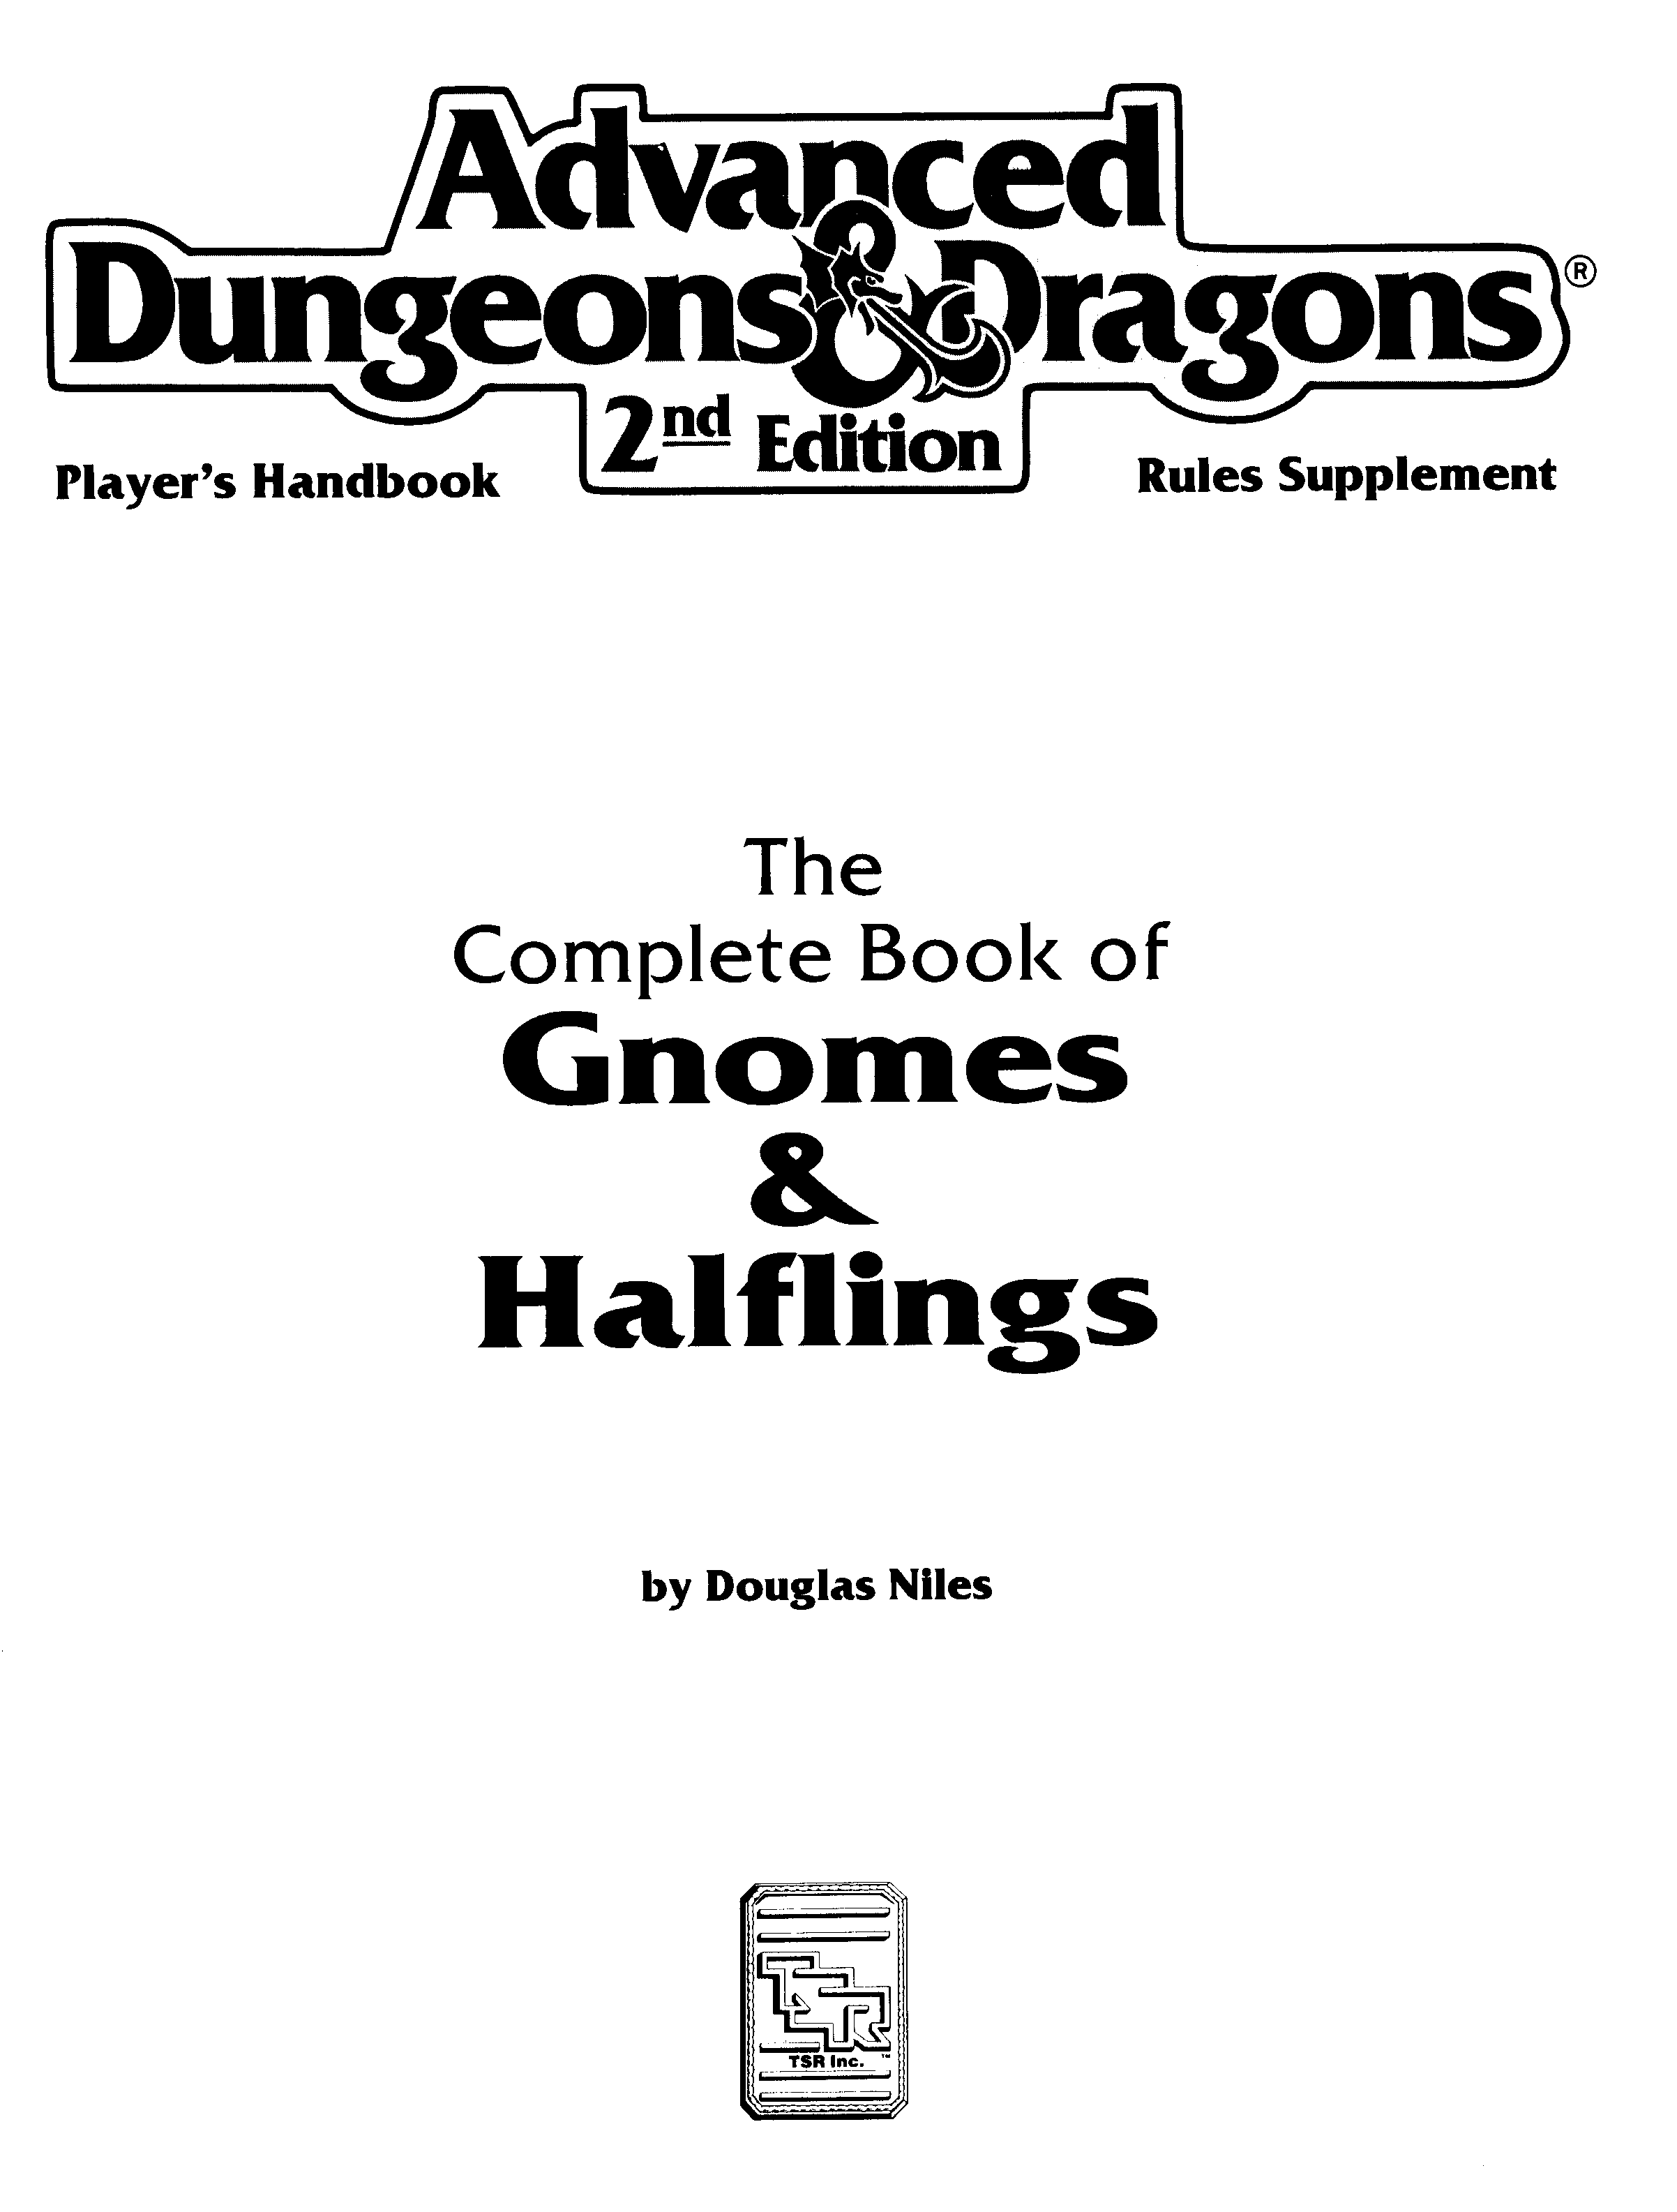 The Complete Book of Gnomes&Halflings